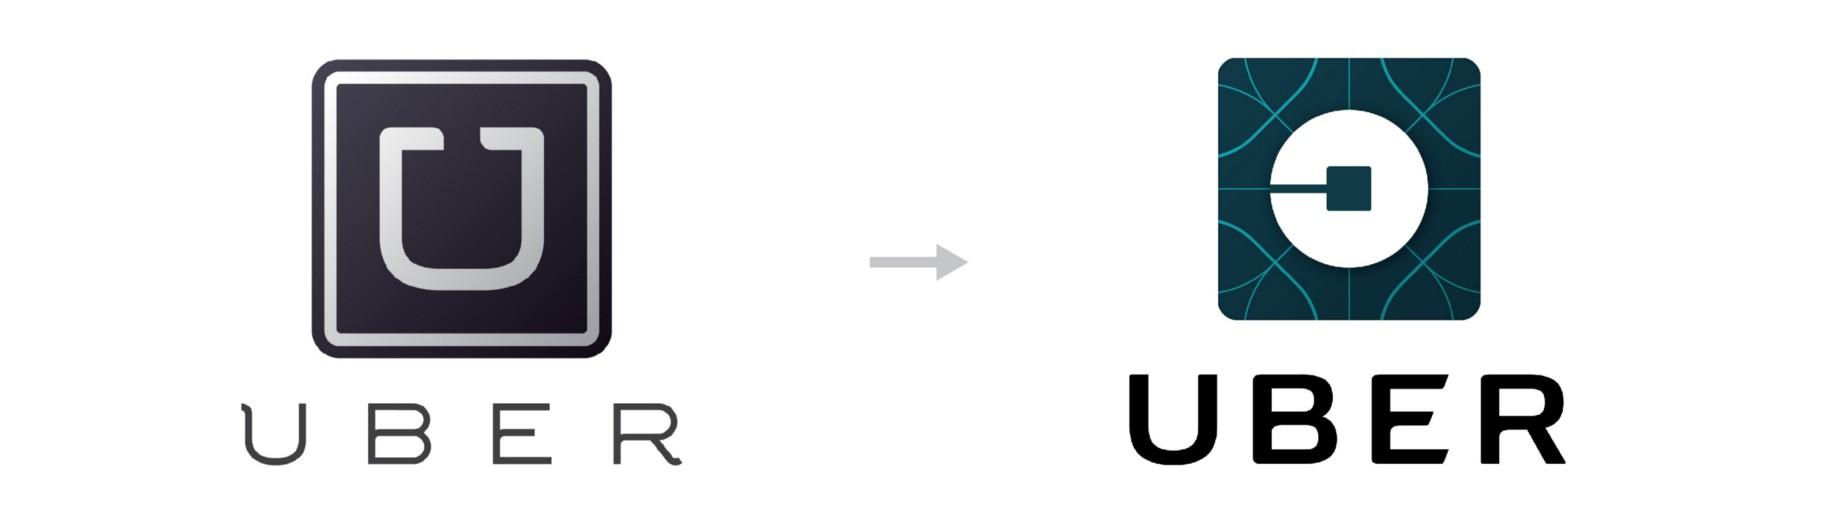 Ber Logo - A Closer Look at the 2016 Uber Redesign and Logo